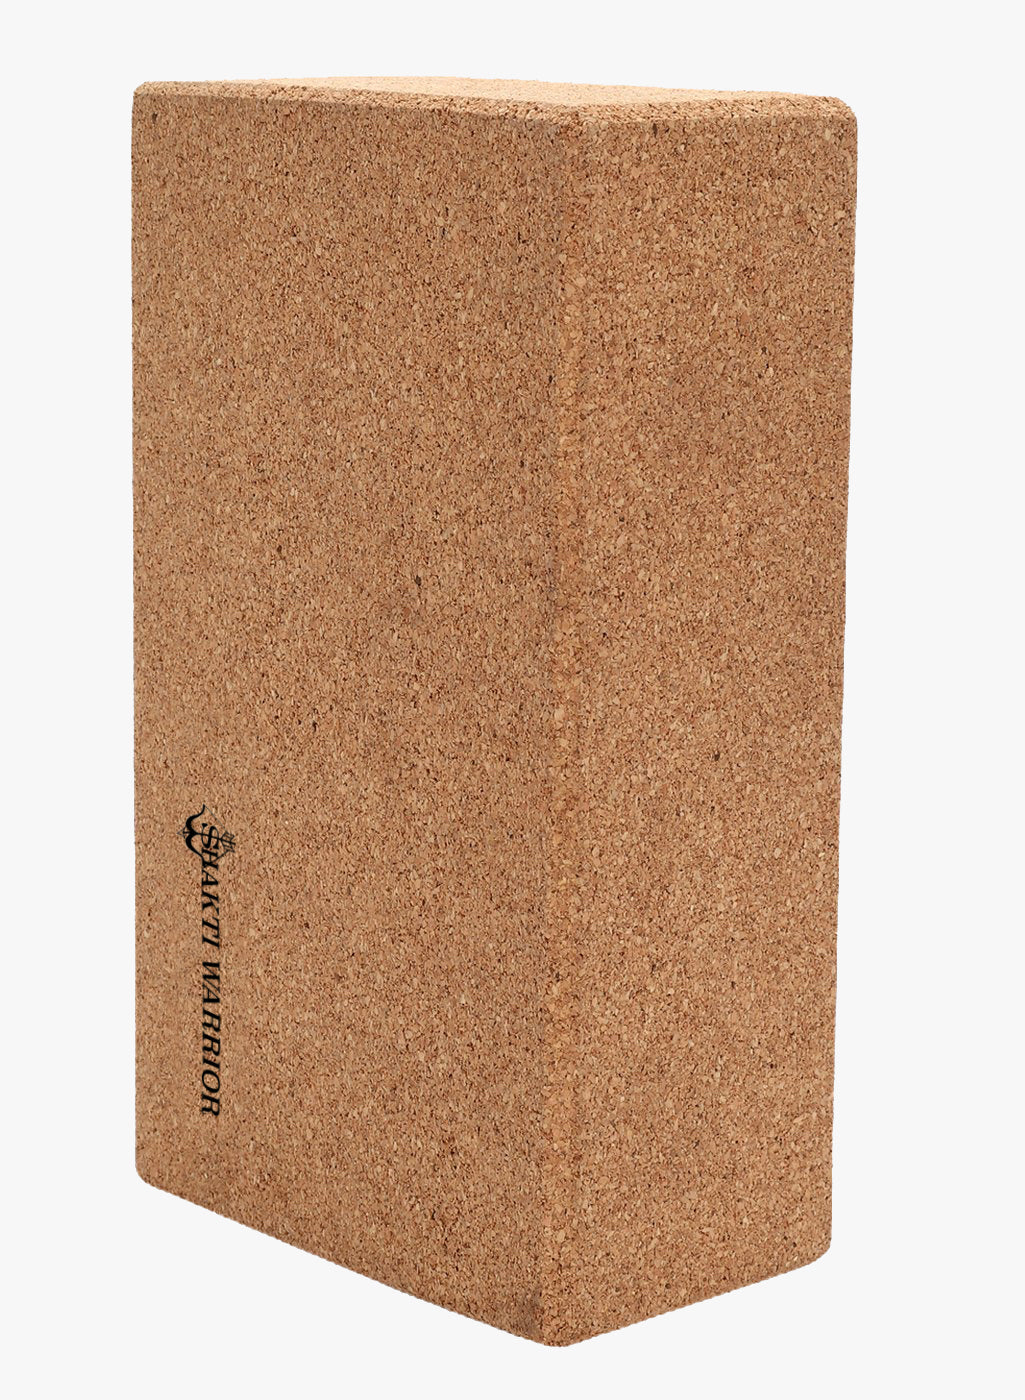 Shakti Warrior Cork Yoga Block - Enhance your practice with premium quality. Stable support for varied poses, easy grip, and comfort. Elevate your yoga journey with the best cork block